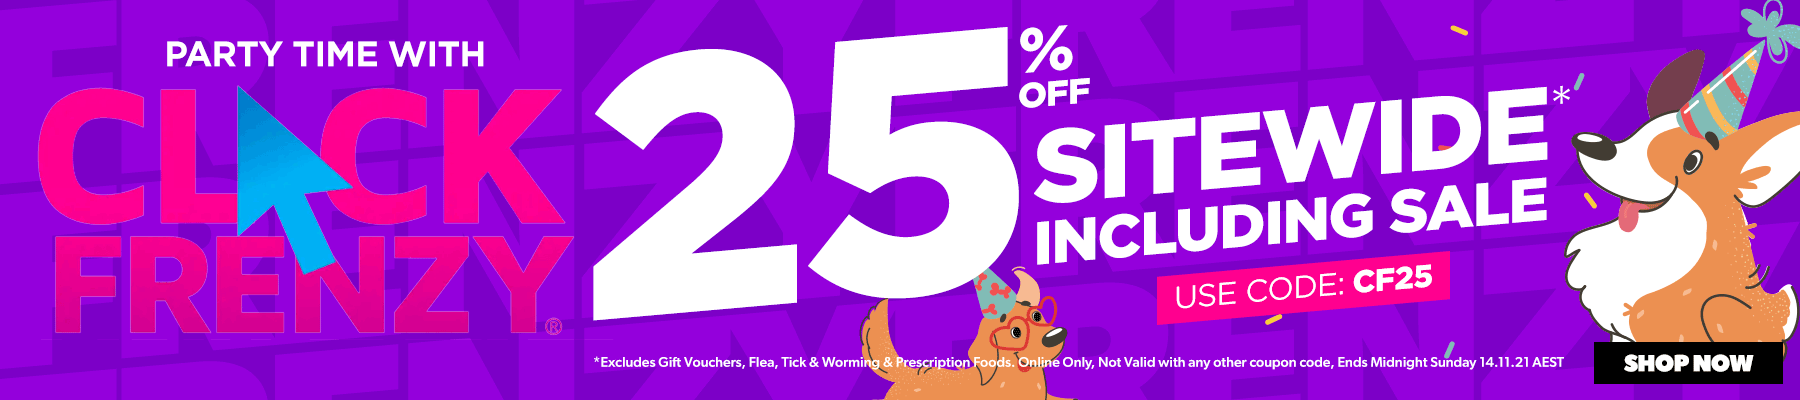 Pet House Click Frenzy | Extra 25% off Sitewide - Exclusions Apply with coupon